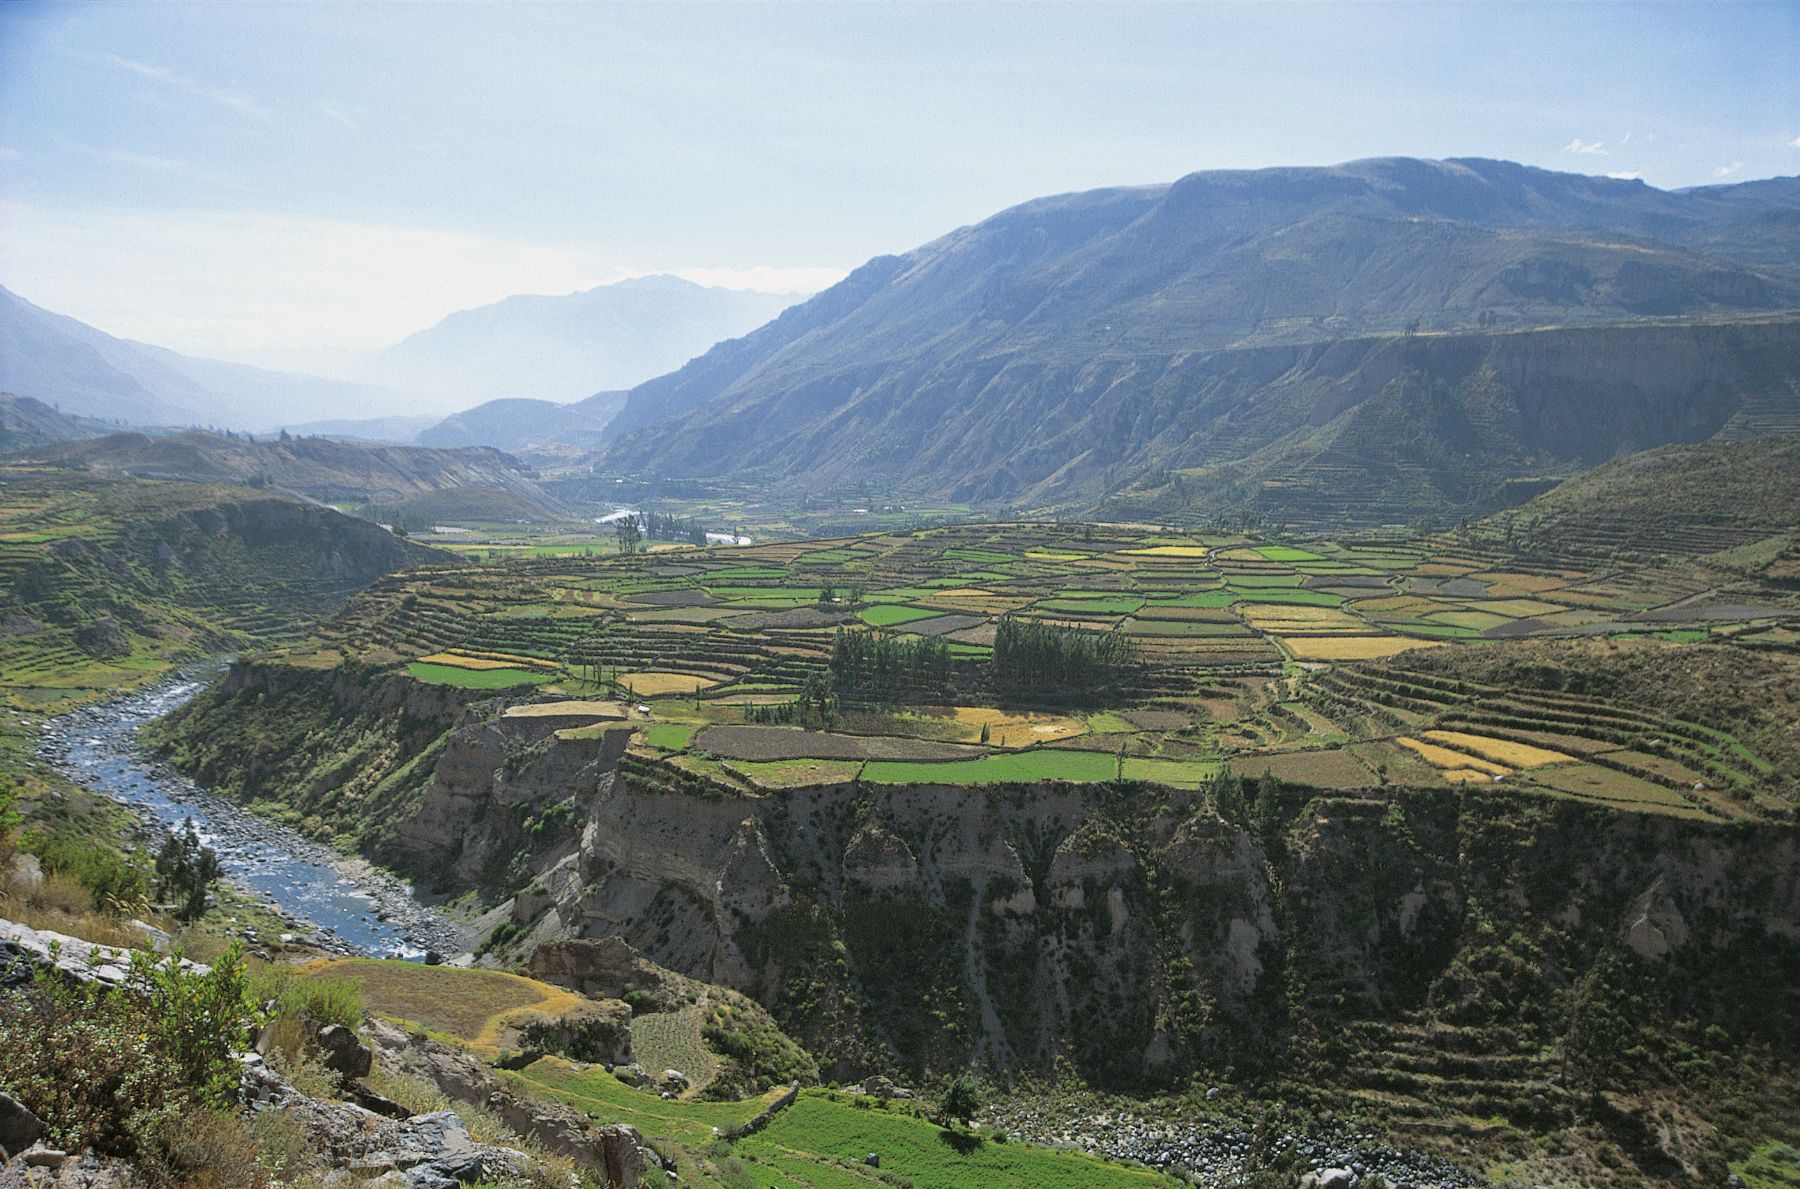 The Colca Valley is located 150 km (4 hours) northeast of Arequipa.